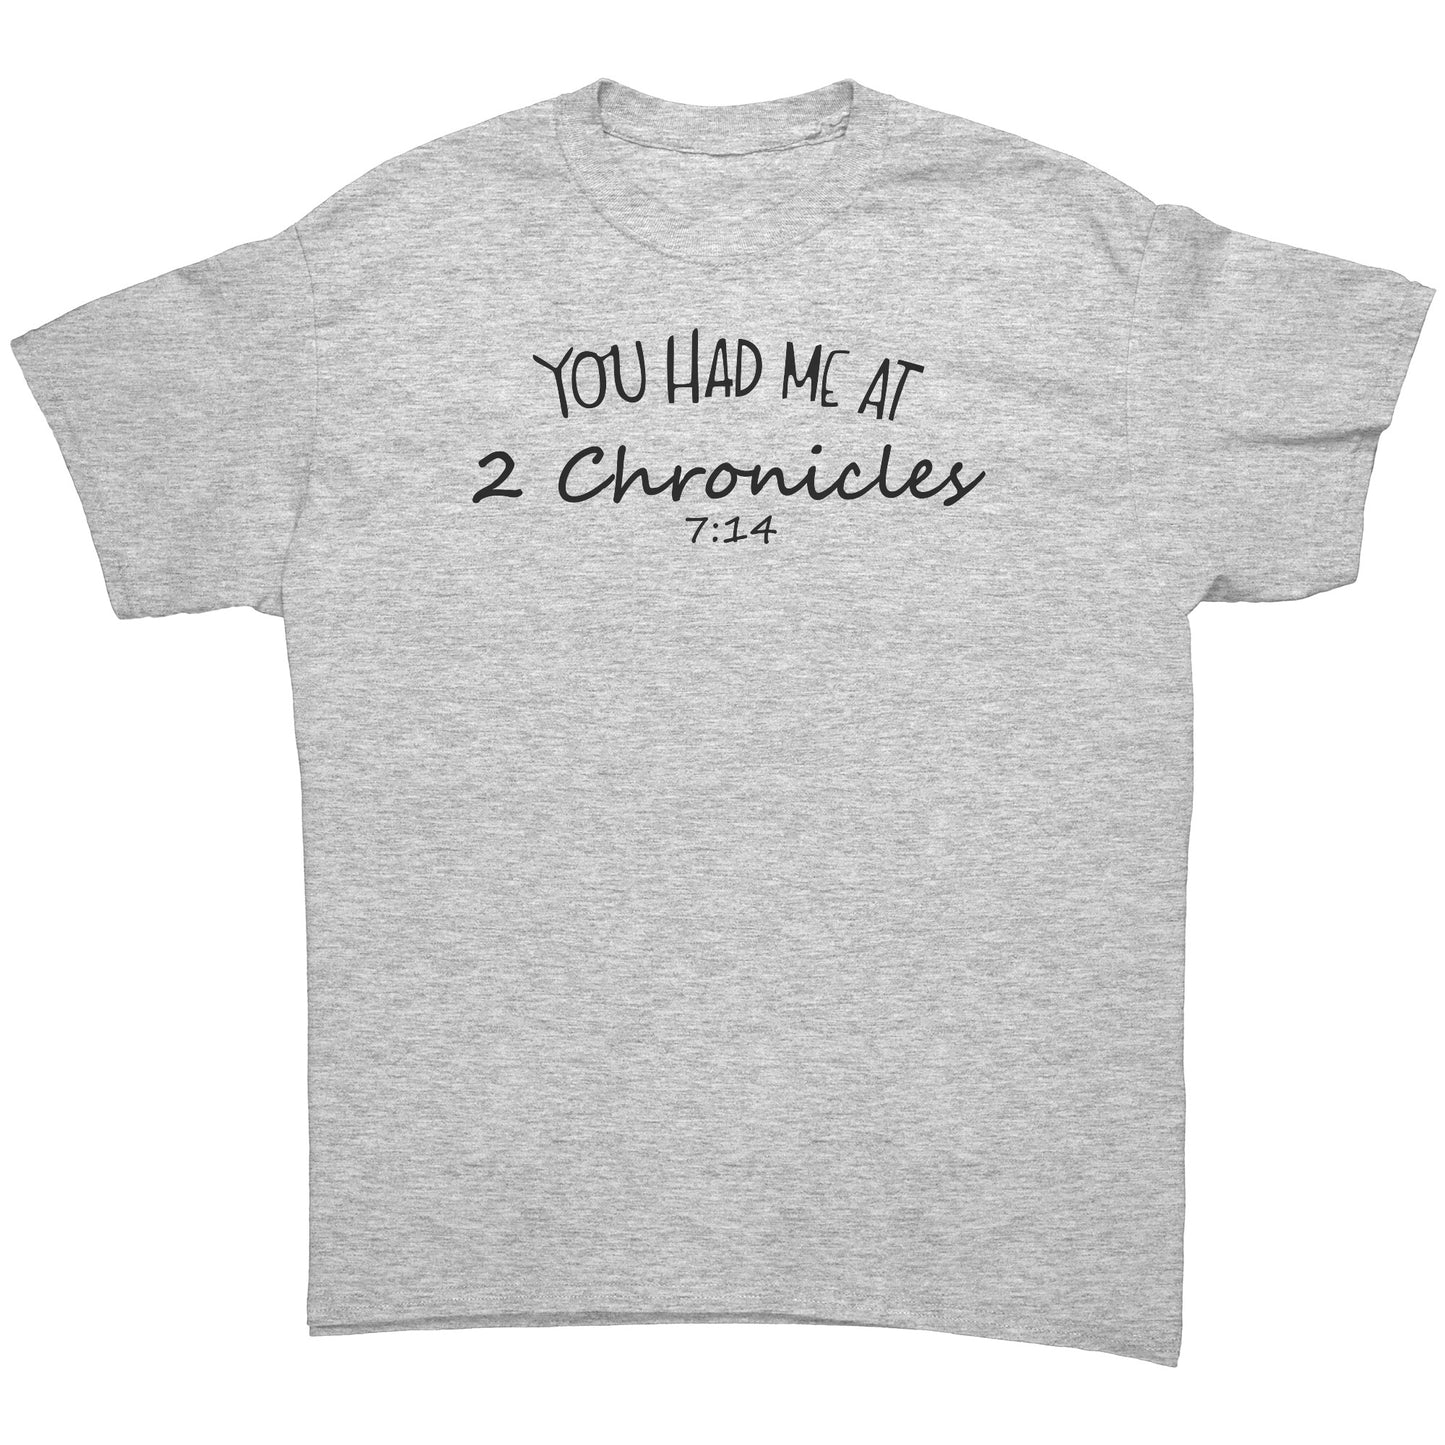 You Had Me At 2 Chronicles 7:14 Men's T-Shirt Part 1